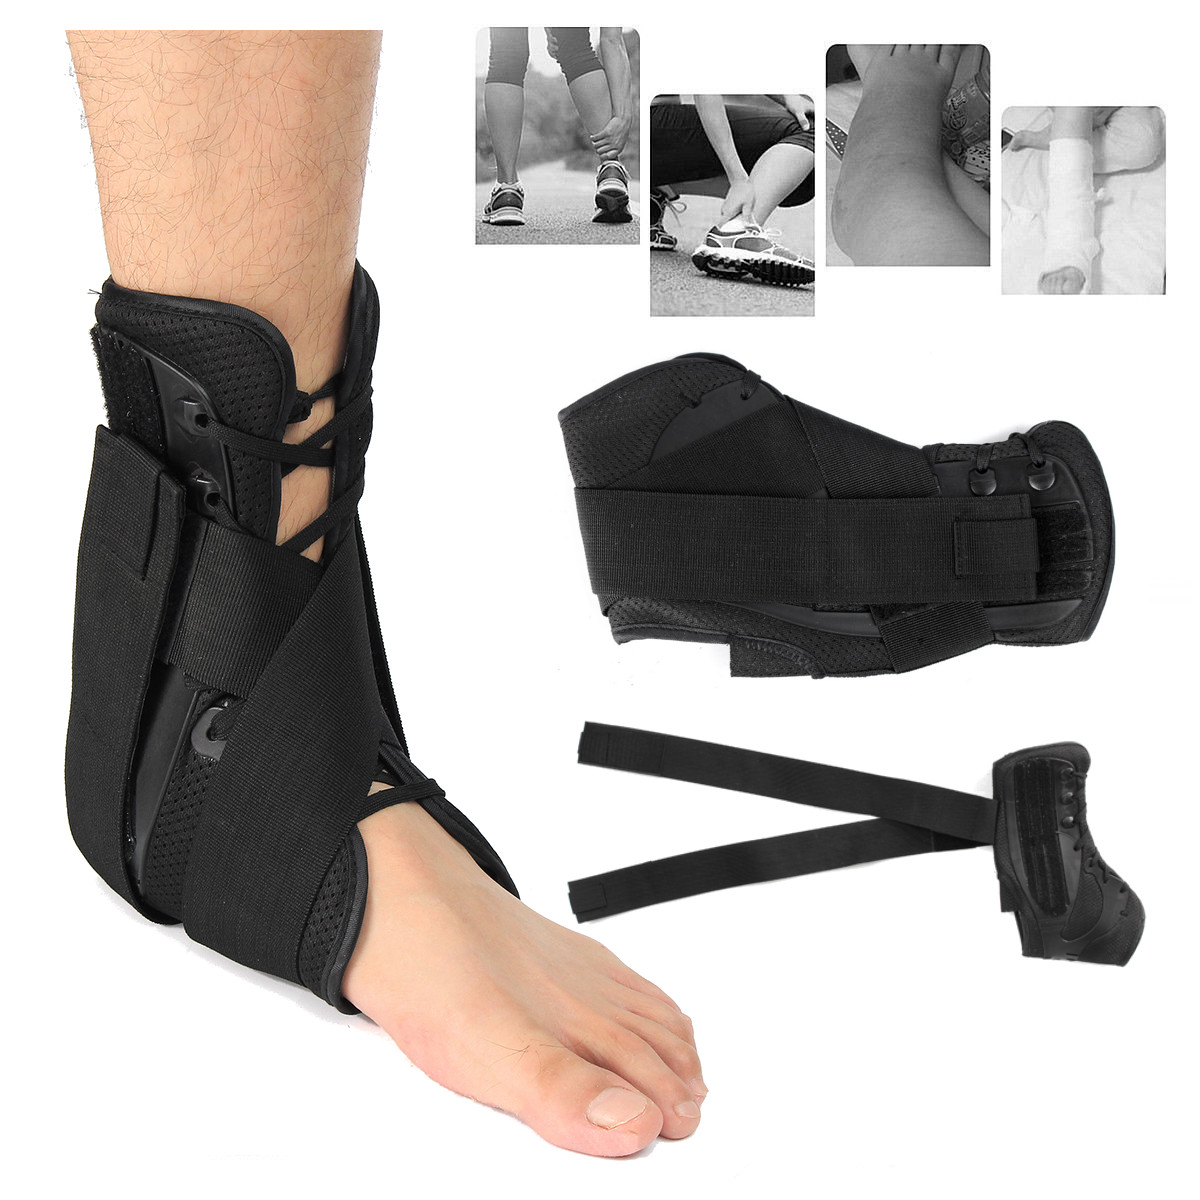 

Adjustable Ankle Support Corrector Brace Foot Guard Sprains Injury Pain Protector Wrap